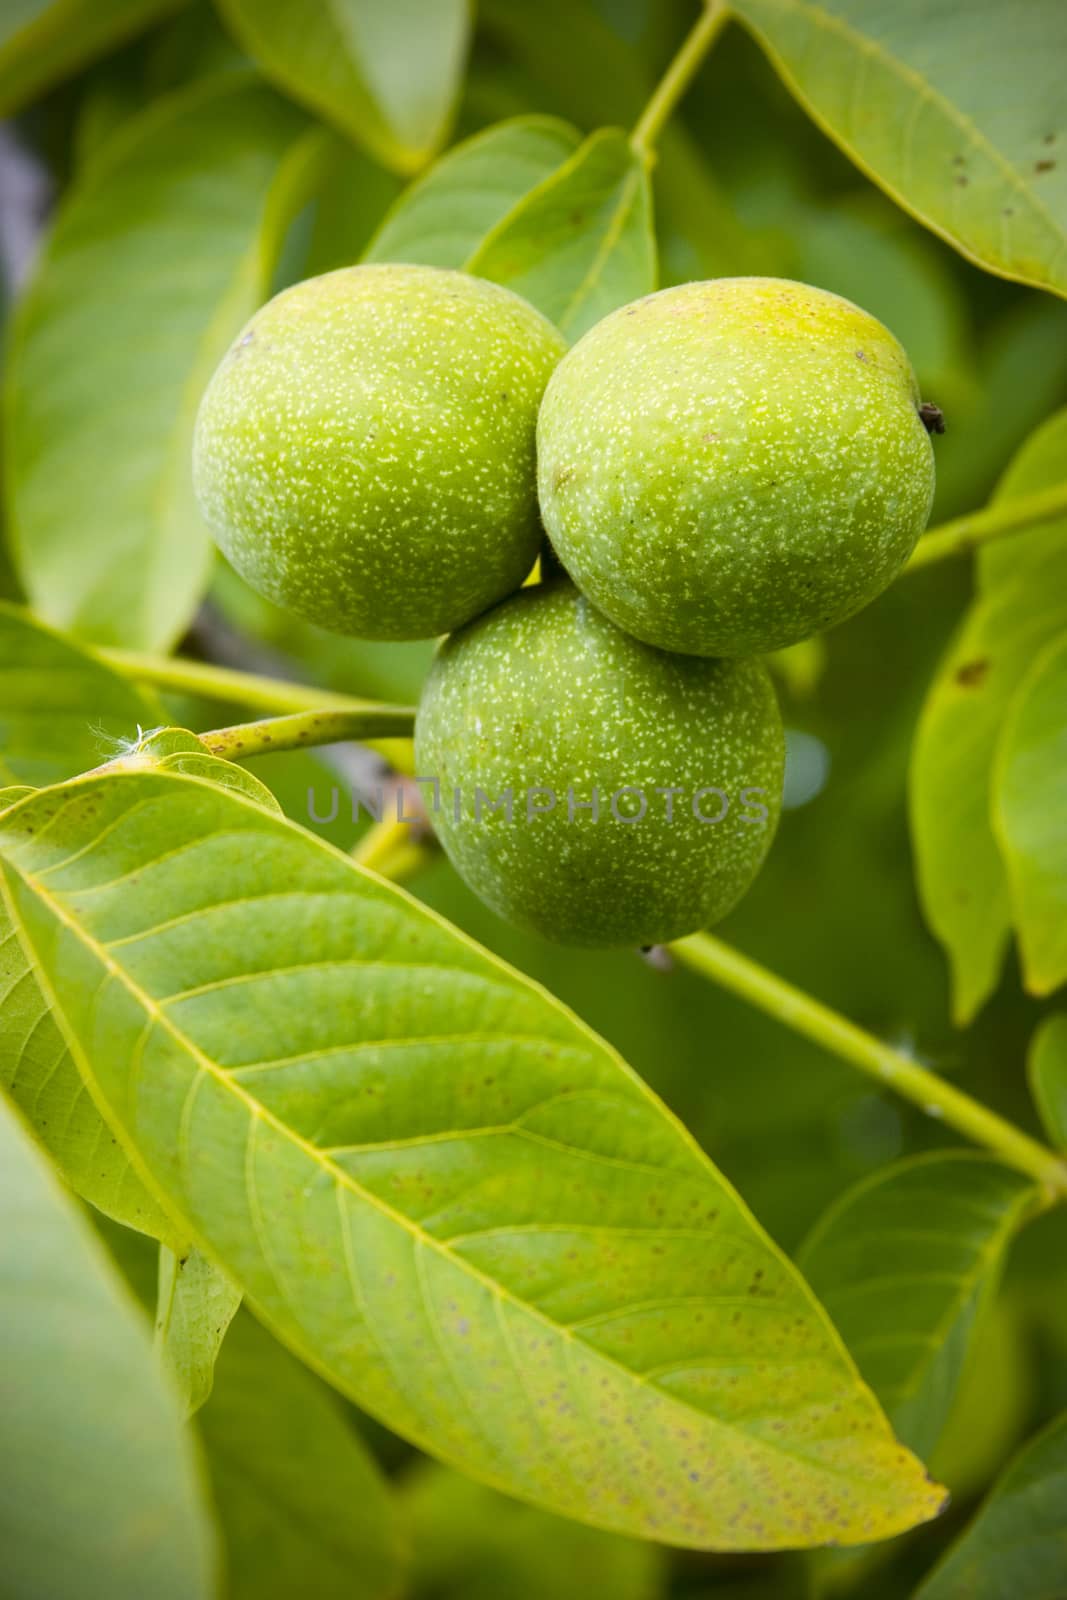 Vivid green walnuts hanging from a branch.